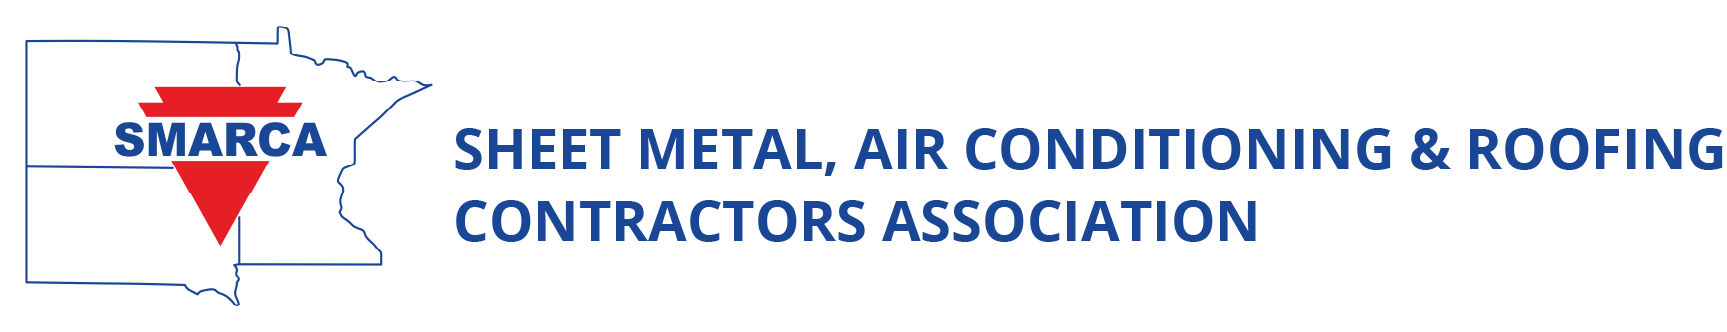 Sheet Metal, Air Conditioning & Roofing Contractors Association Logo